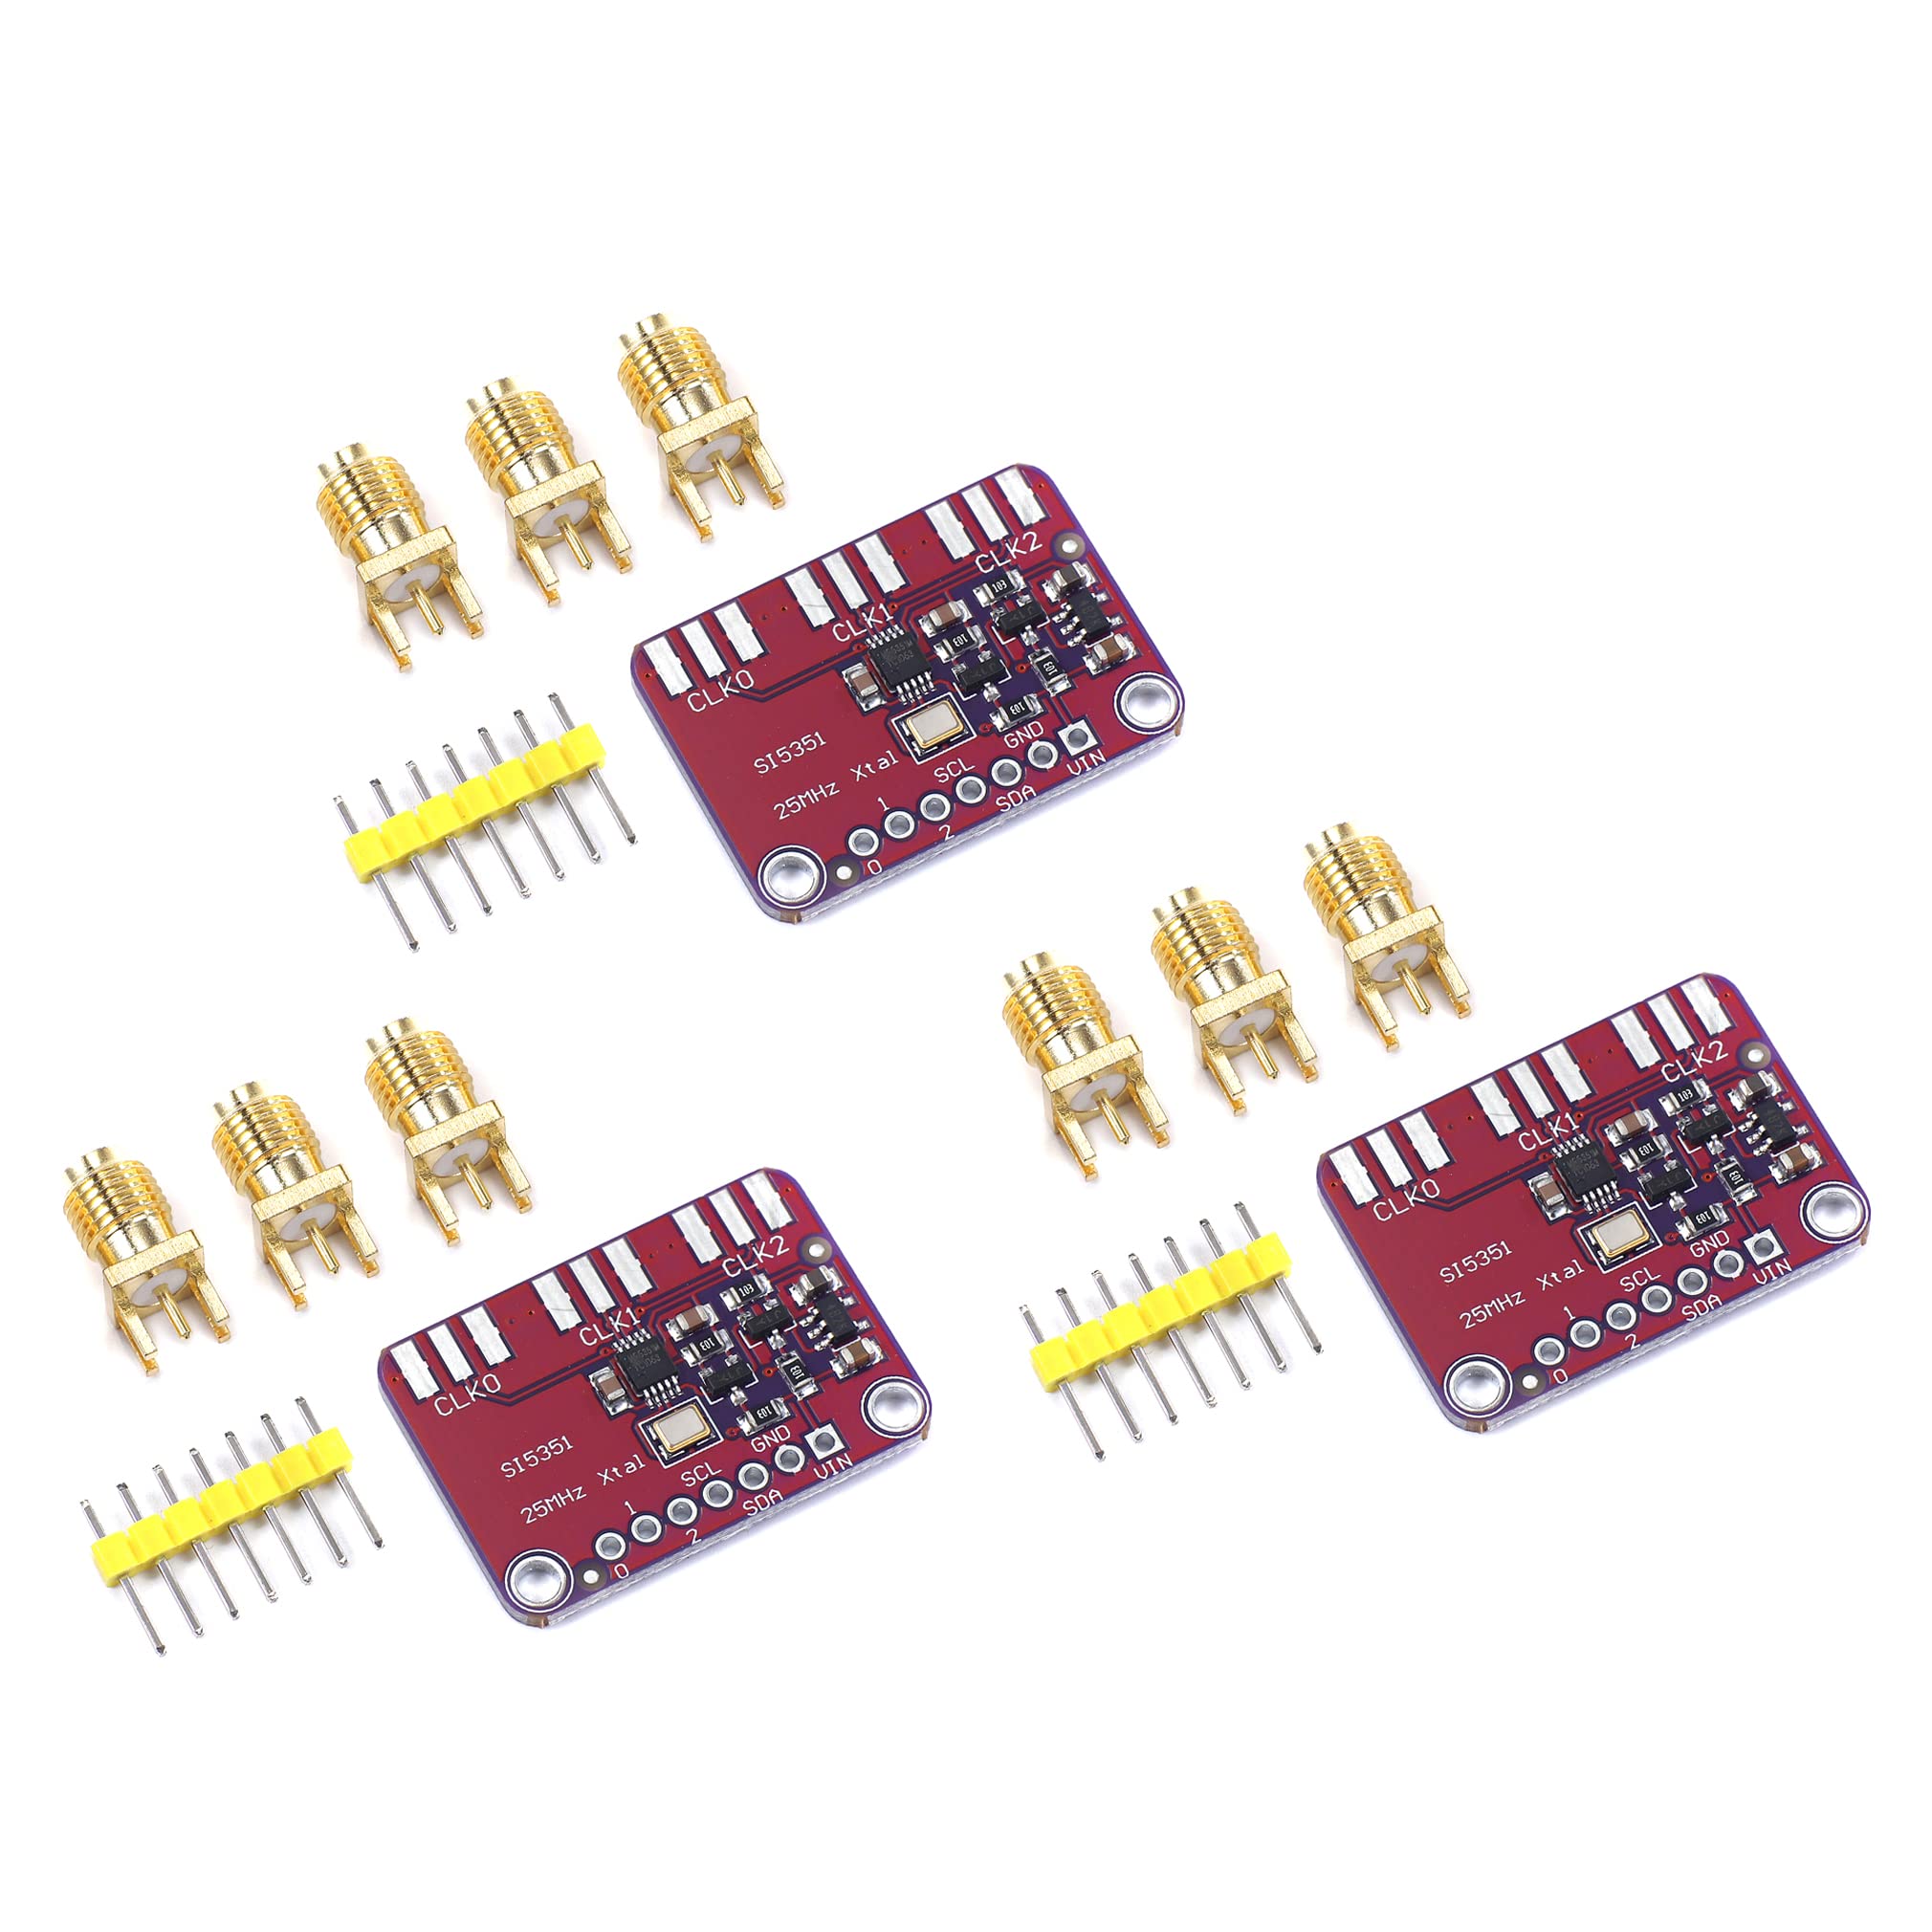 Teyleten Robot Si5351A Si5351 5351 8KHz -160MHz High Frequency Signal Generator Breakout Board DC3.3-5V Square Wave Frequency Generator Board Module I2C for Arduino (3pcs)